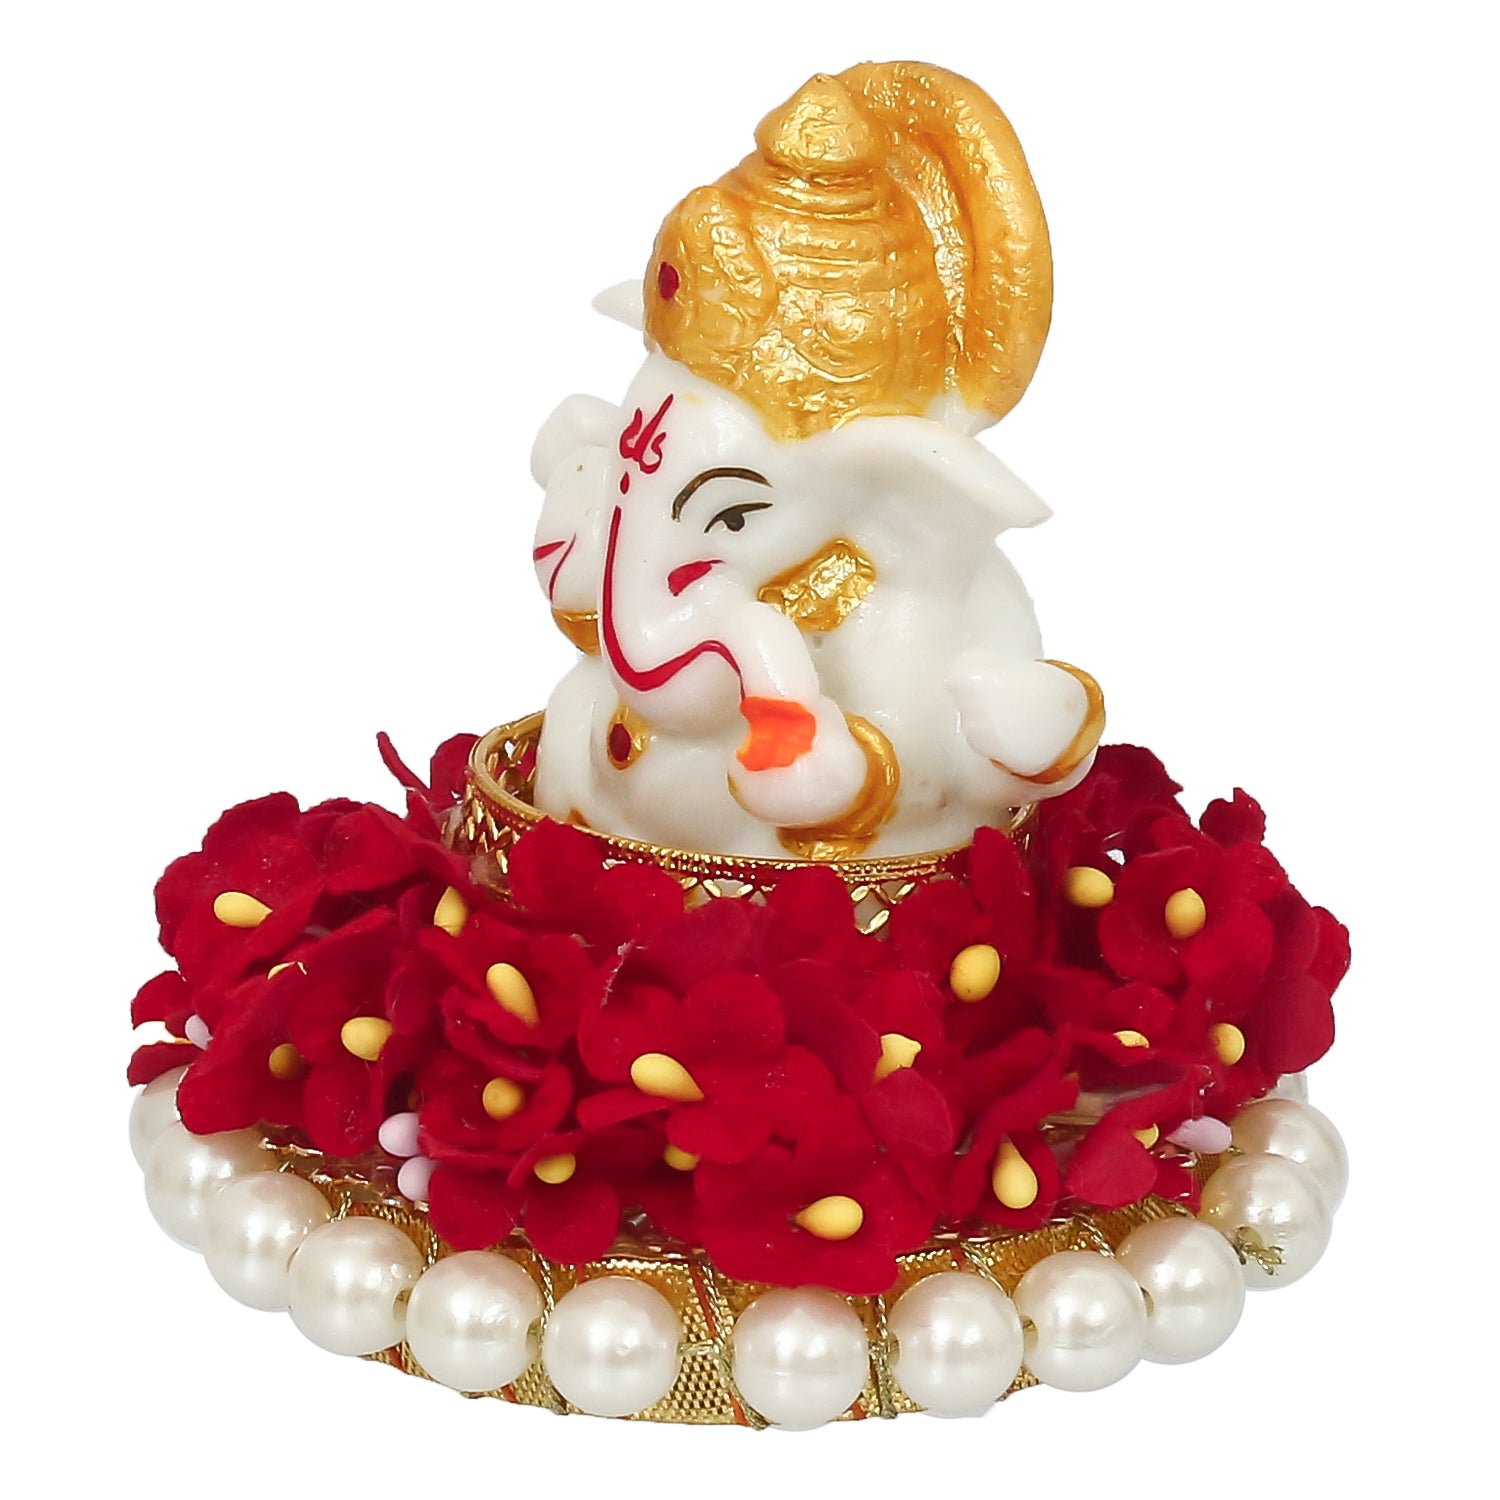 Lord Ganesha Idol On Decorative Handicrafted Plate For Home And Car Dashboard 4